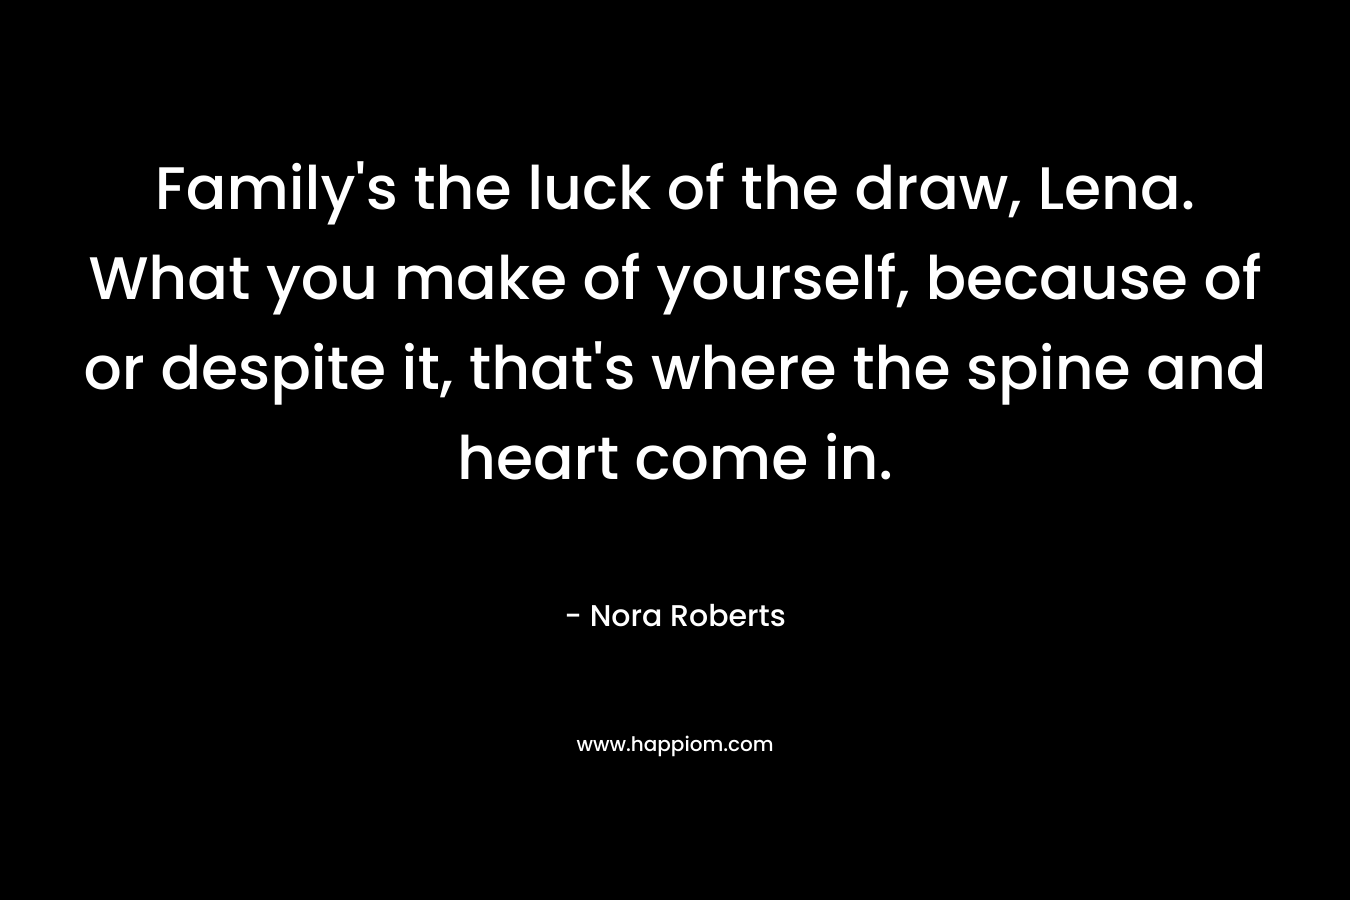 Family's the luck of the draw, Lena. What you make of yourself, because of or despite it, that's where the spine and heart come in.